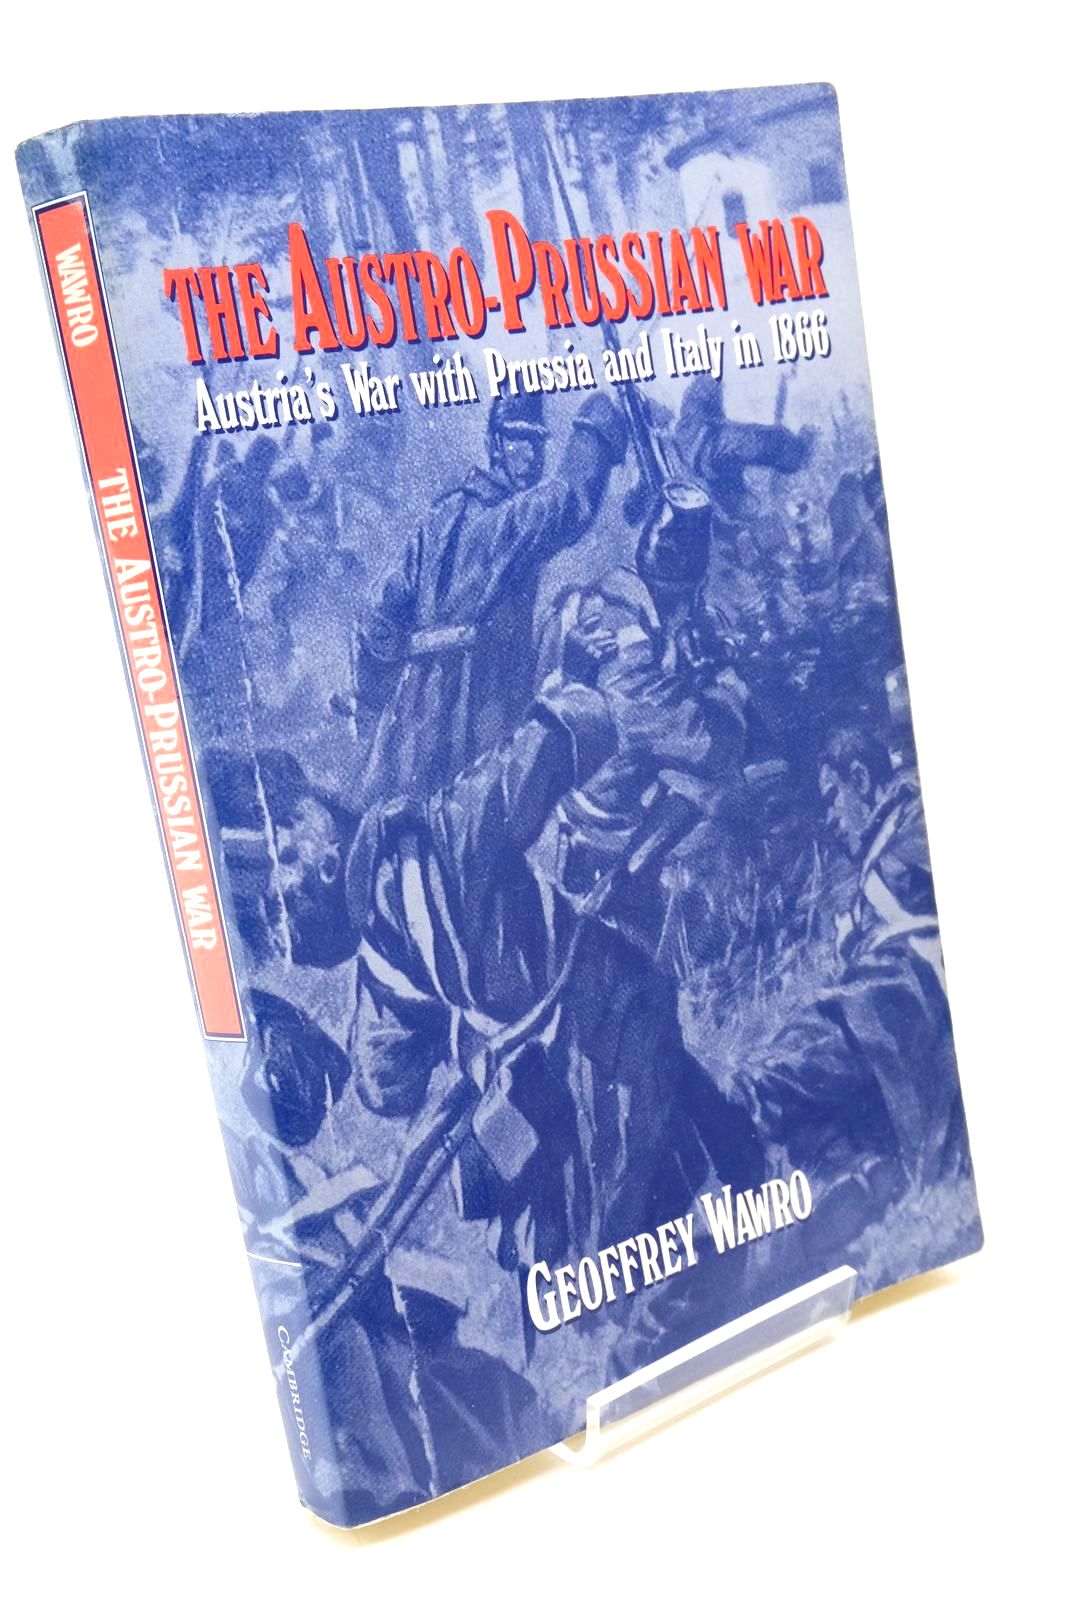 Photo of THE AUSTRO-PRUSSIAN WAR written by Wawro, Geoffrey published by Cambridge University Press (STOCK CODE: 1322534)  for sale by Stella & Rose's Books